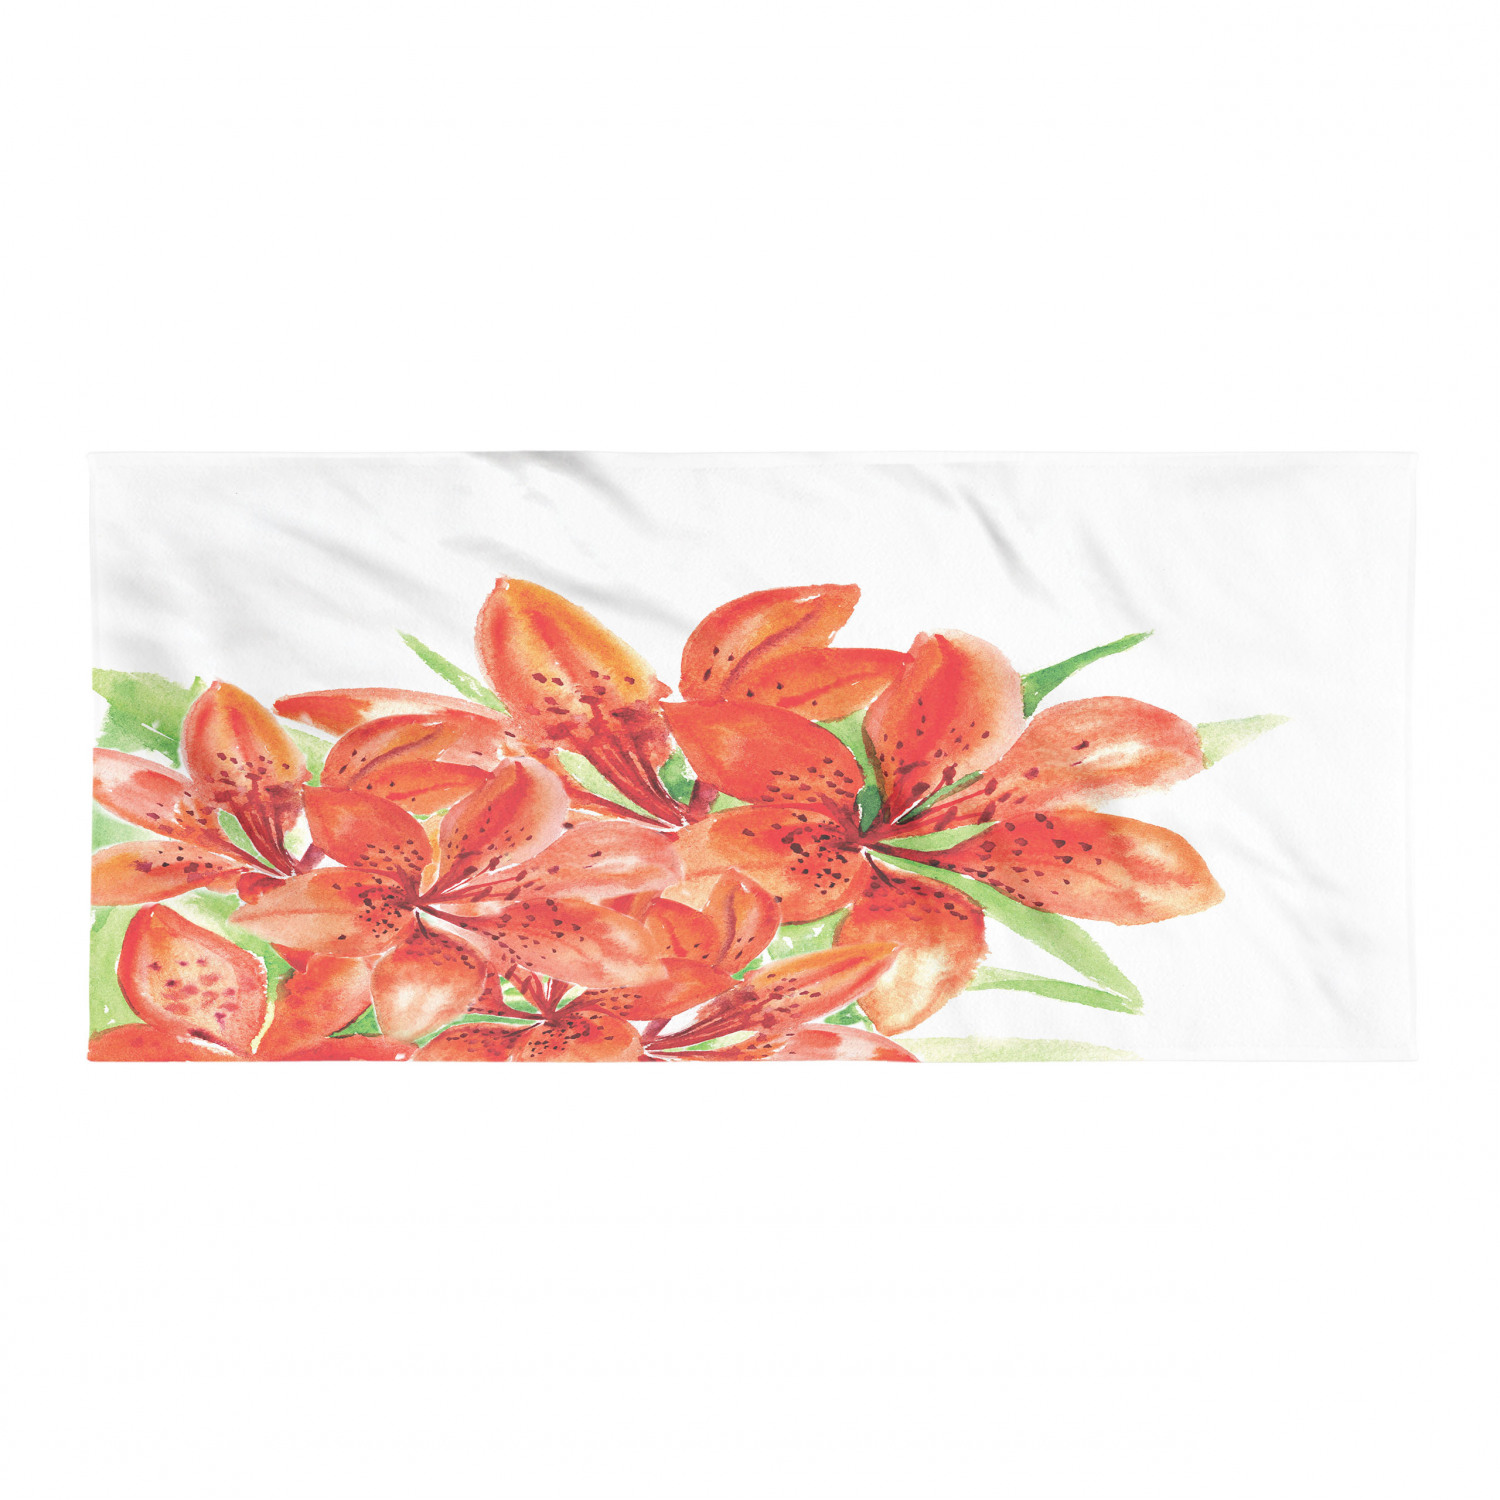 Watercolor Flower Camping Towel, Pastoral Themed Large Lilies in Vibrant Colors Habitus of Flora Art, Quick Dry Lightweight Ultra Compact Microfiber for Backpacking Hiking, Red Green, by Ambesonne - image 1 of 2